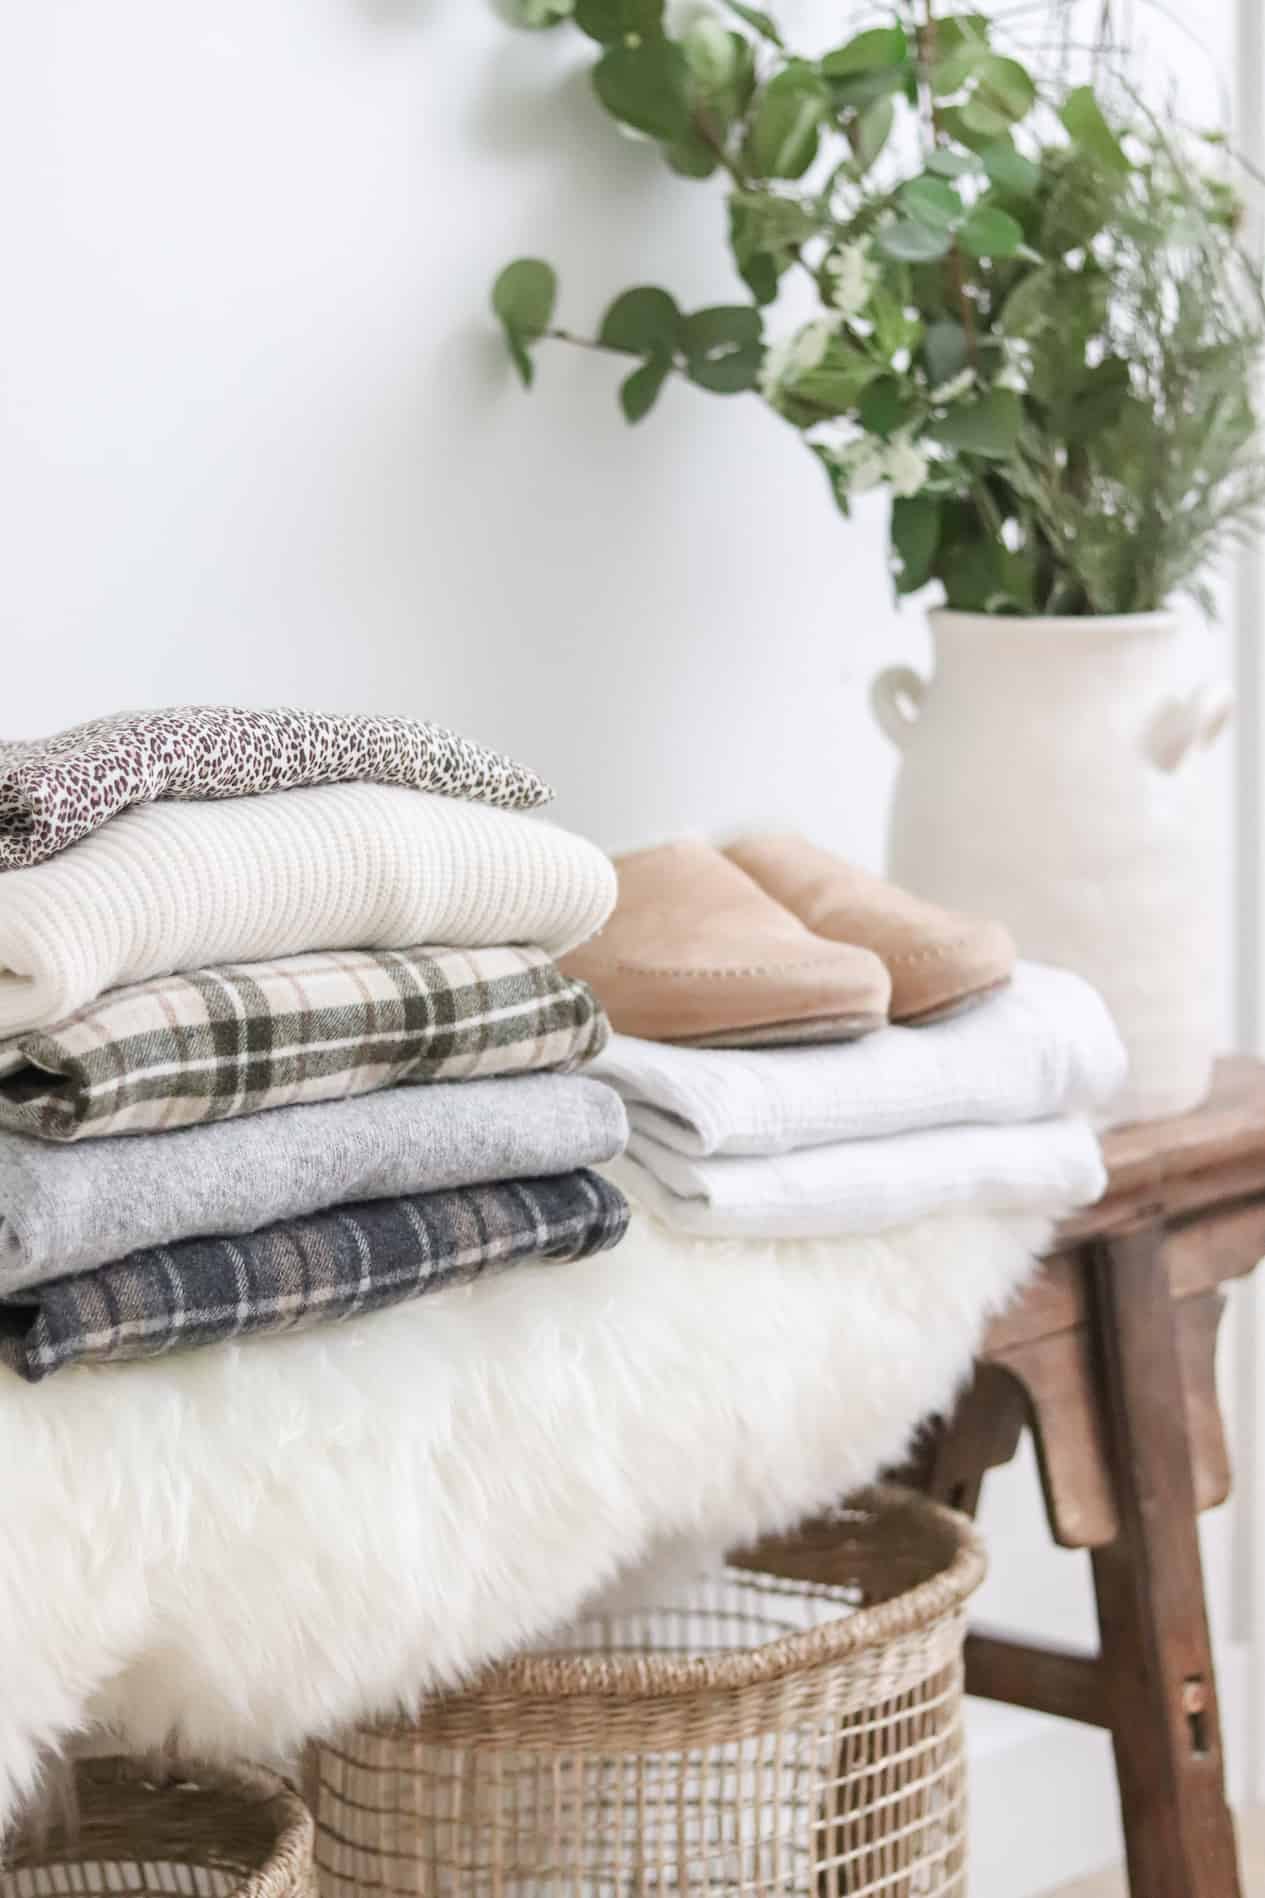 Clothing and slippers stacked on a wooden bench and faux fur.